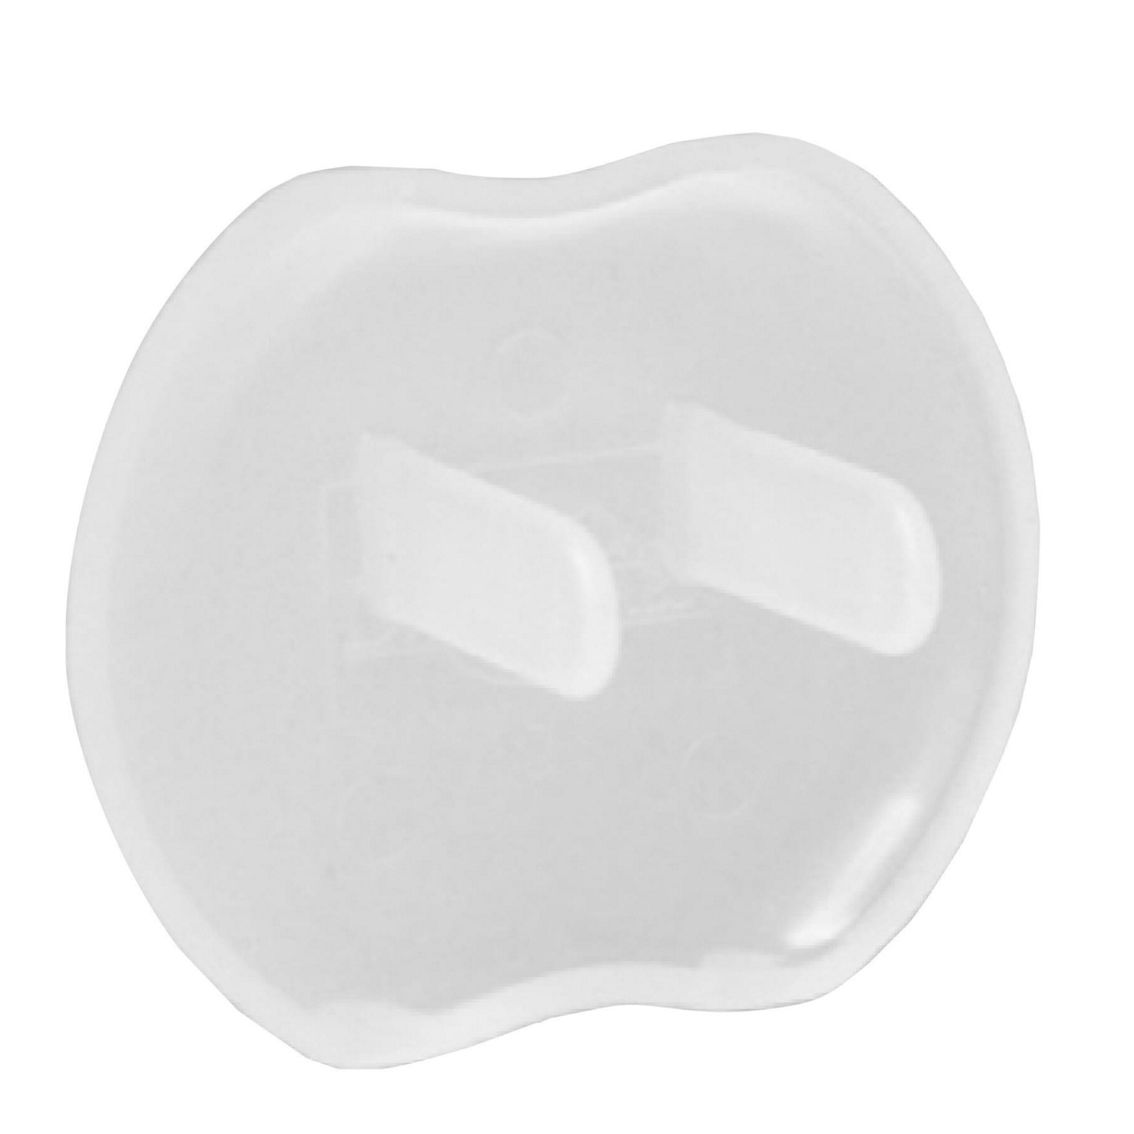 Dreambaby® Outlet Covers, 48 Per Pack, 6 Packs - Image 3 of 4